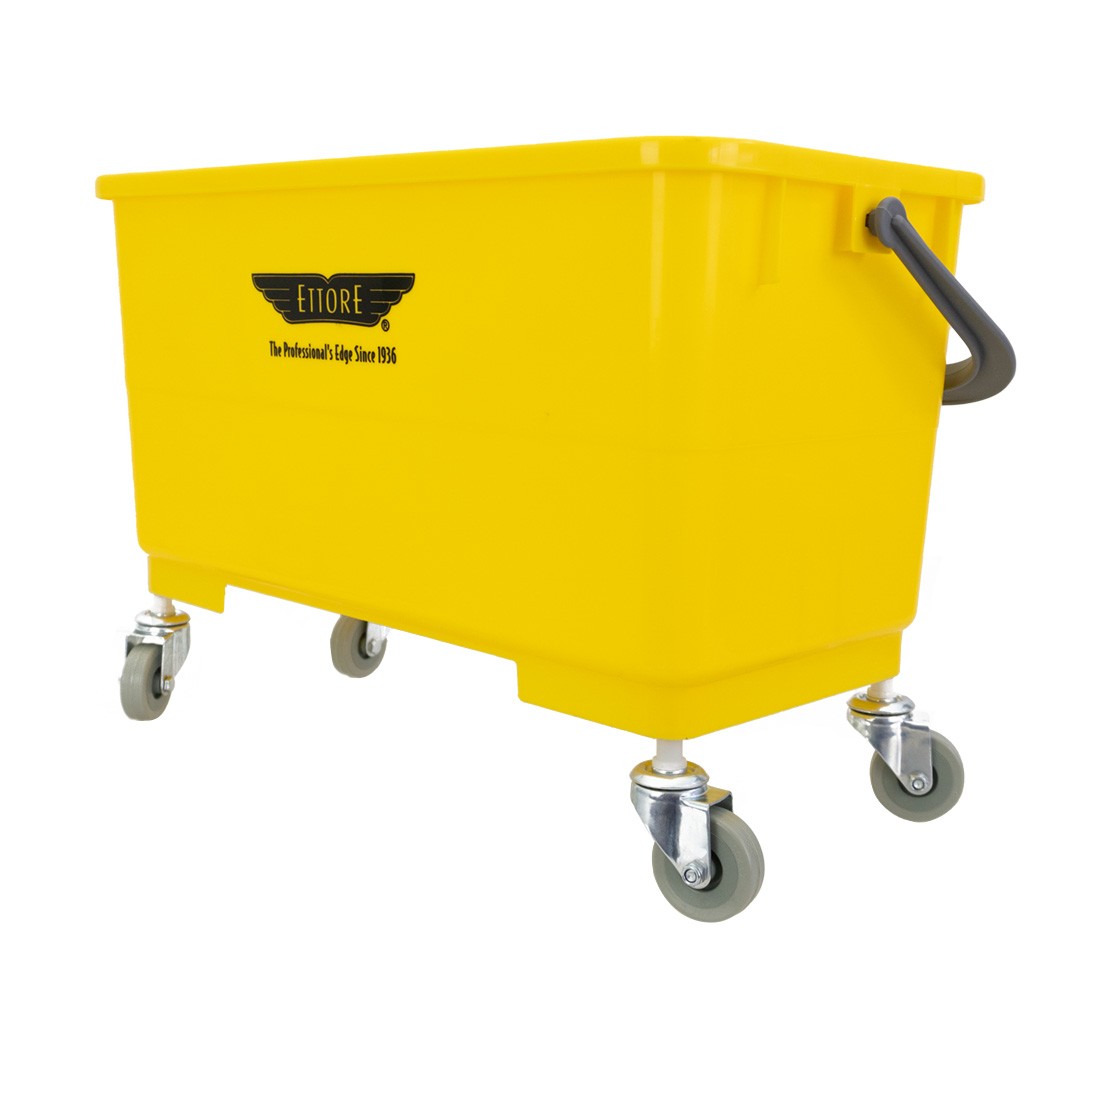 Ettore Super Bucket Casters - Set of Four - Casters On Bucket Demonstration Angle View